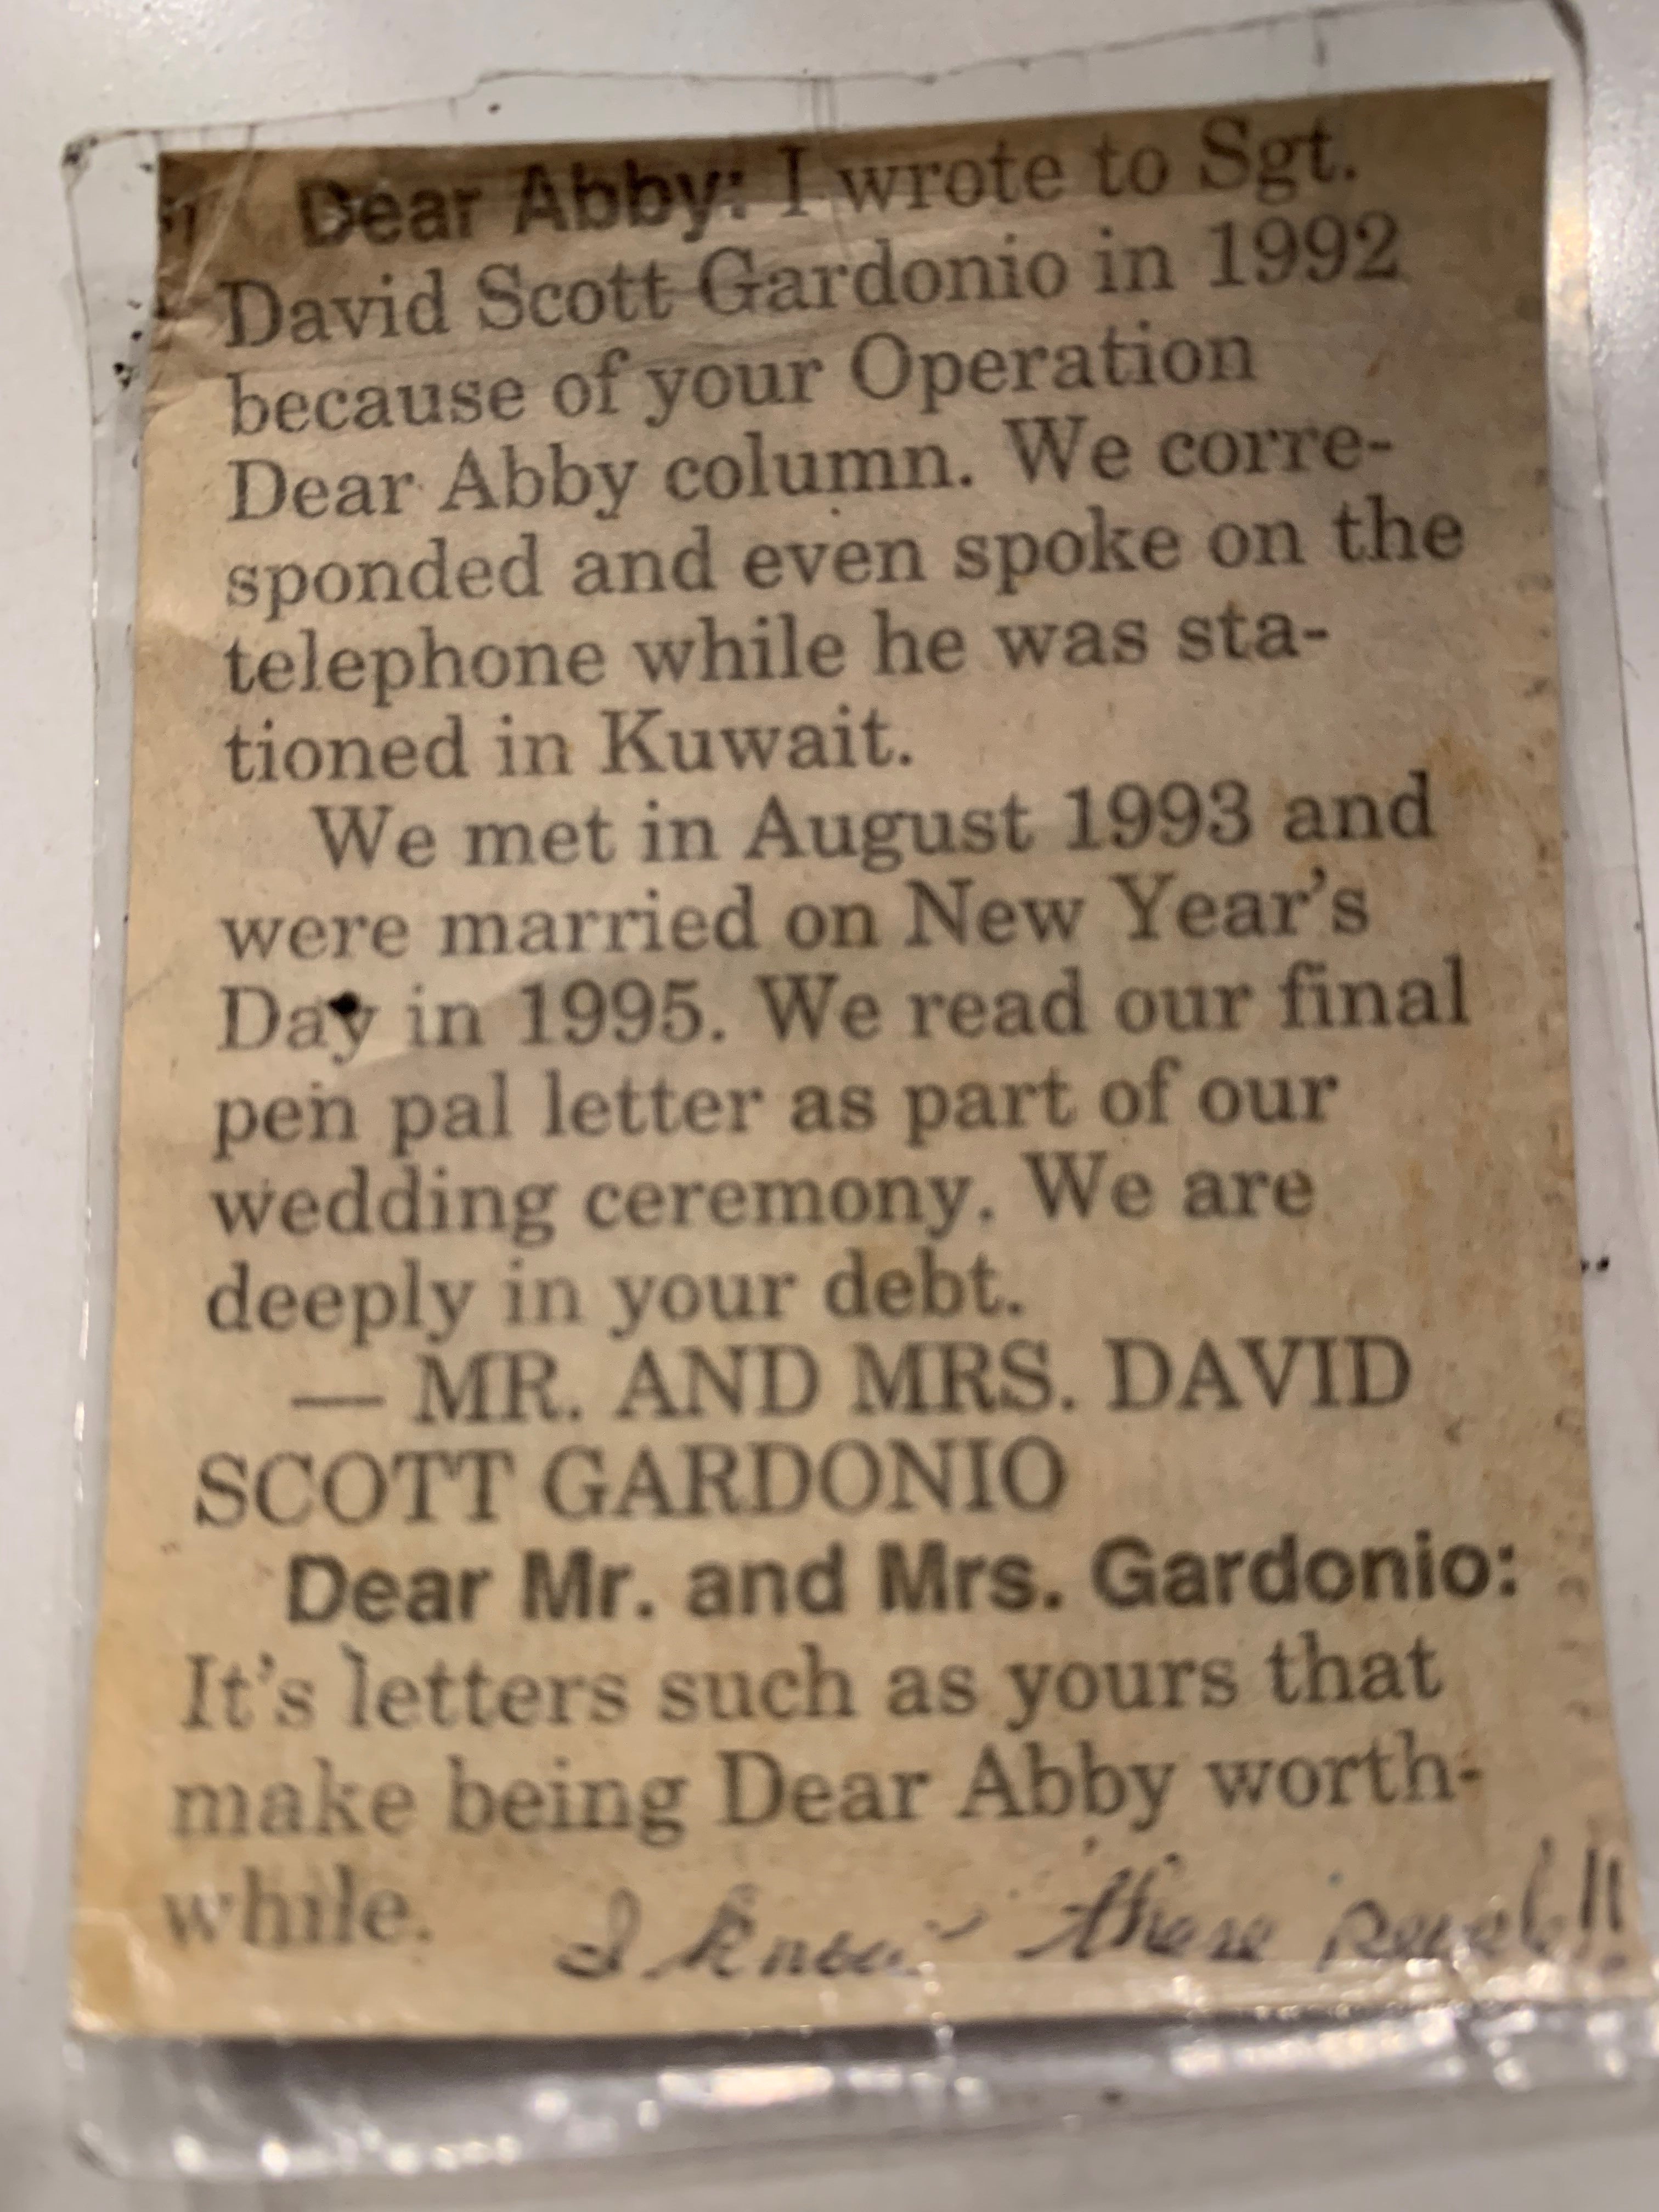 The newspaper clipping of Kandi's note to Dear Abby and the published response.